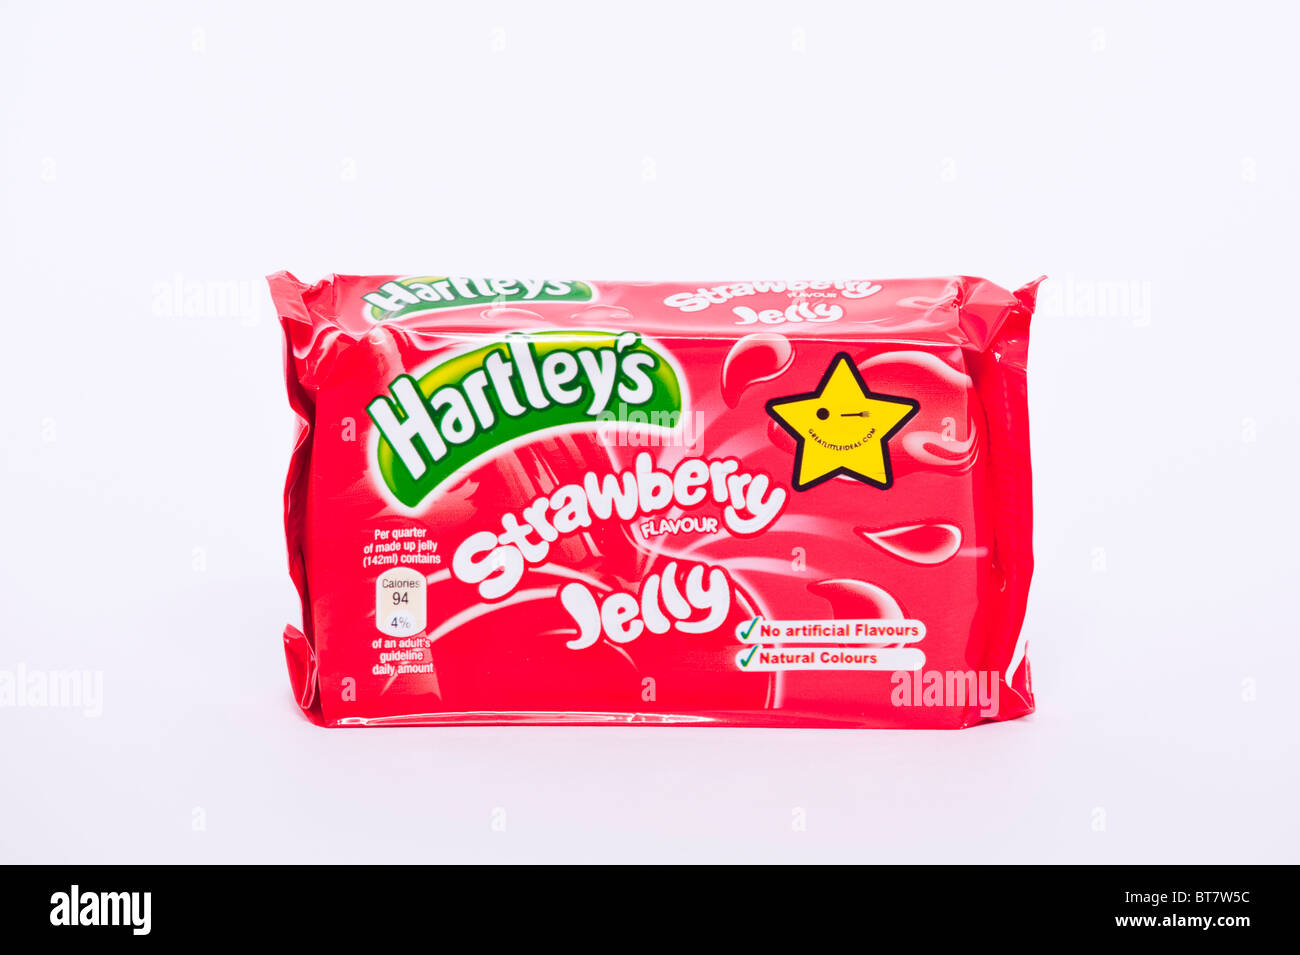 A close up photo of a packet of Hartleys strawberry flavour jelly against a white background Stock Photo